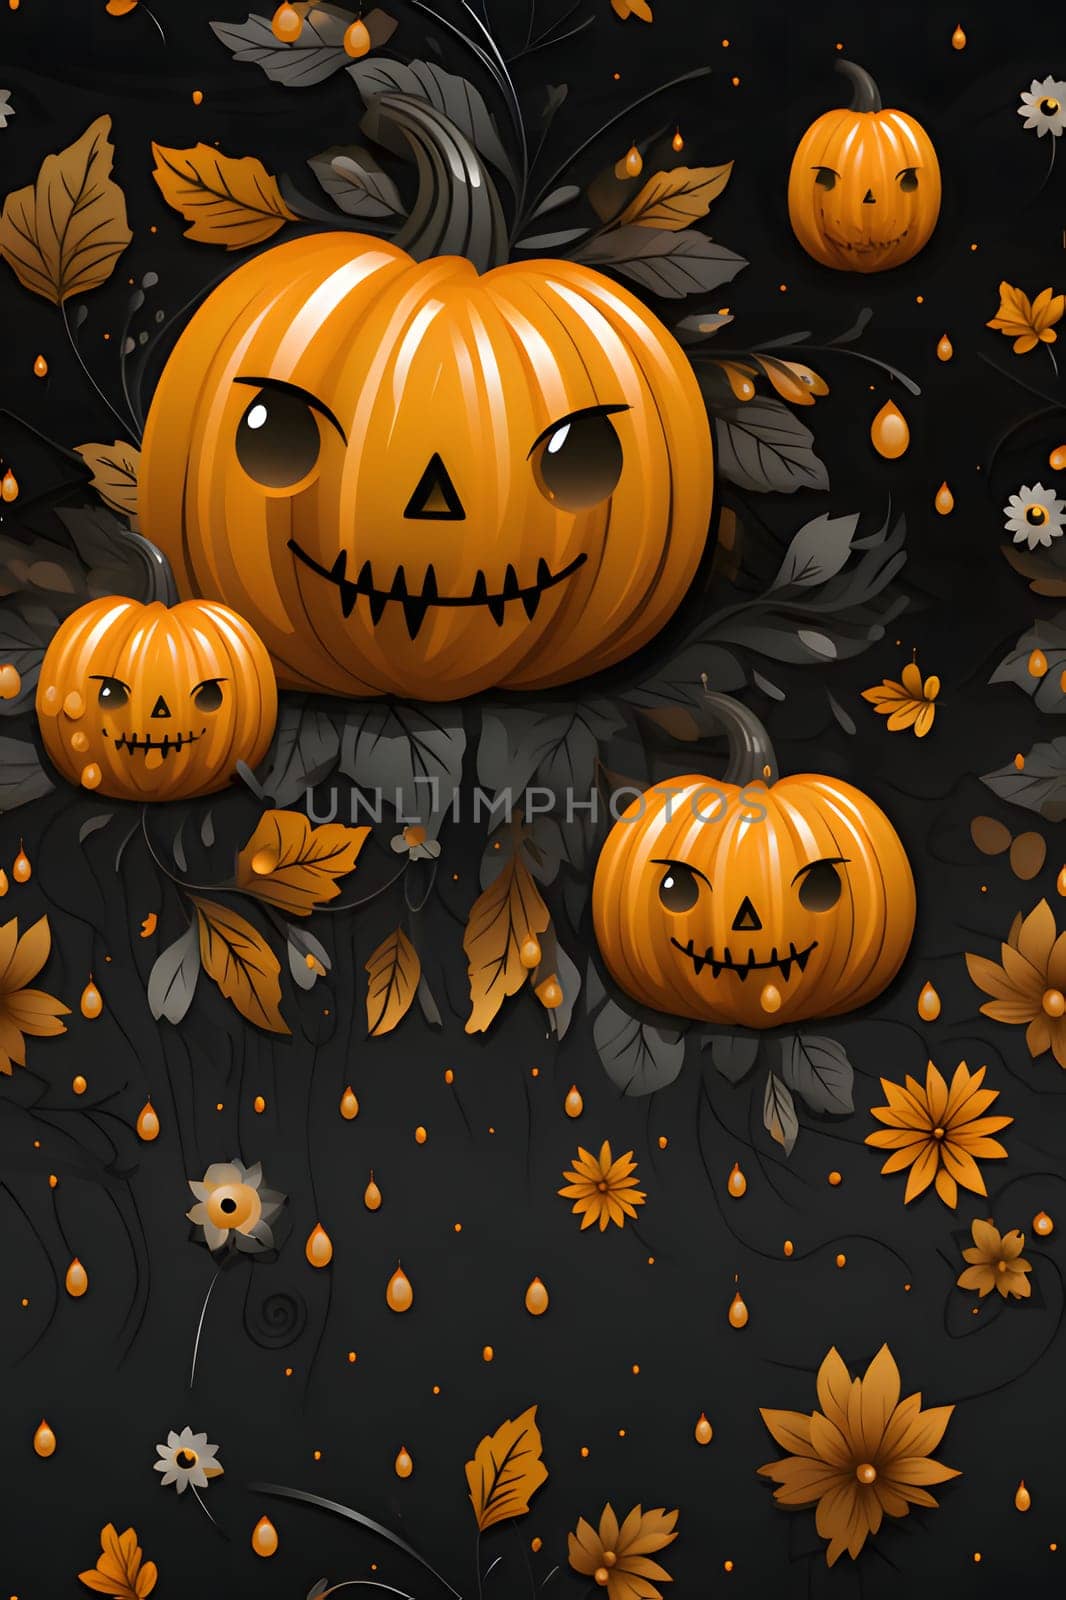 Jack-o-lantern pumpkins in leaves, banner with space for your own content. by ThemesS